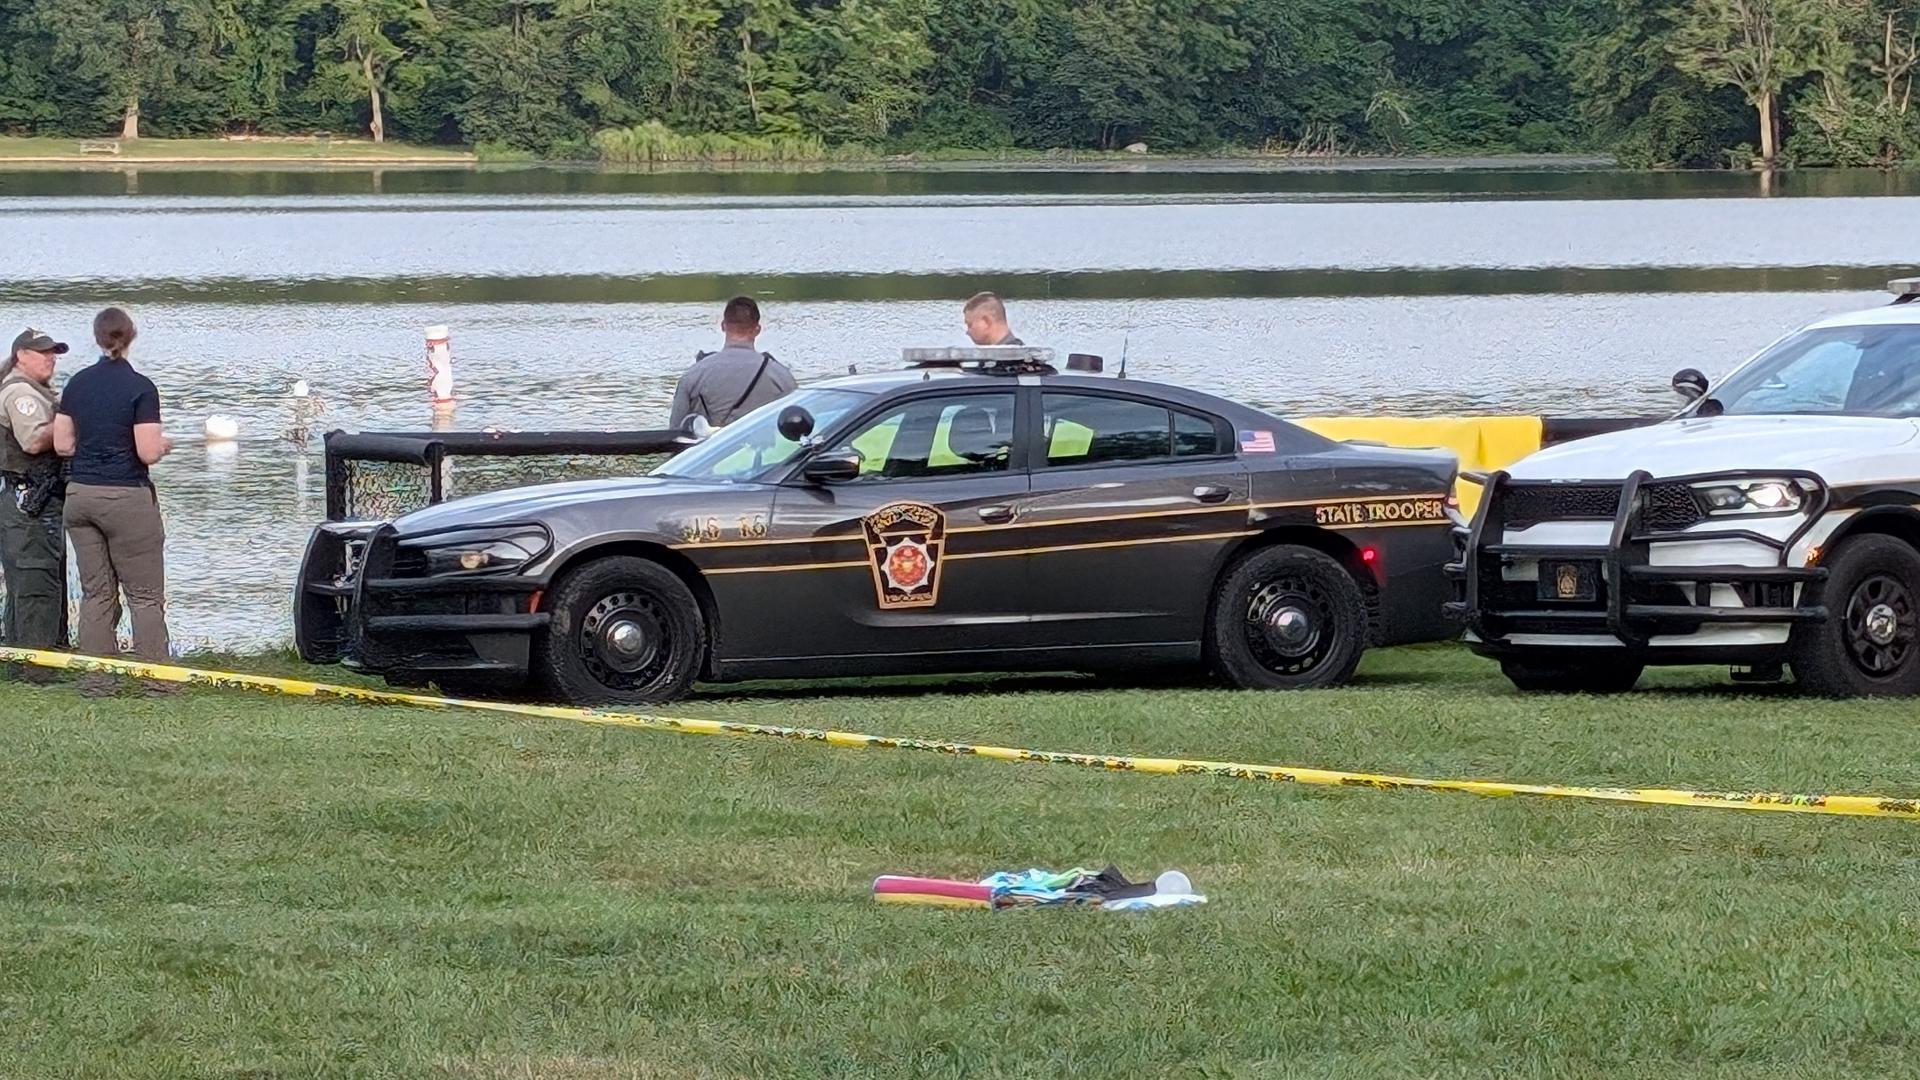 The coroner was called to the Quaker Race Day Use Area swimming beach following a reported water rescue at 4:58 p.m., according to dispatch.